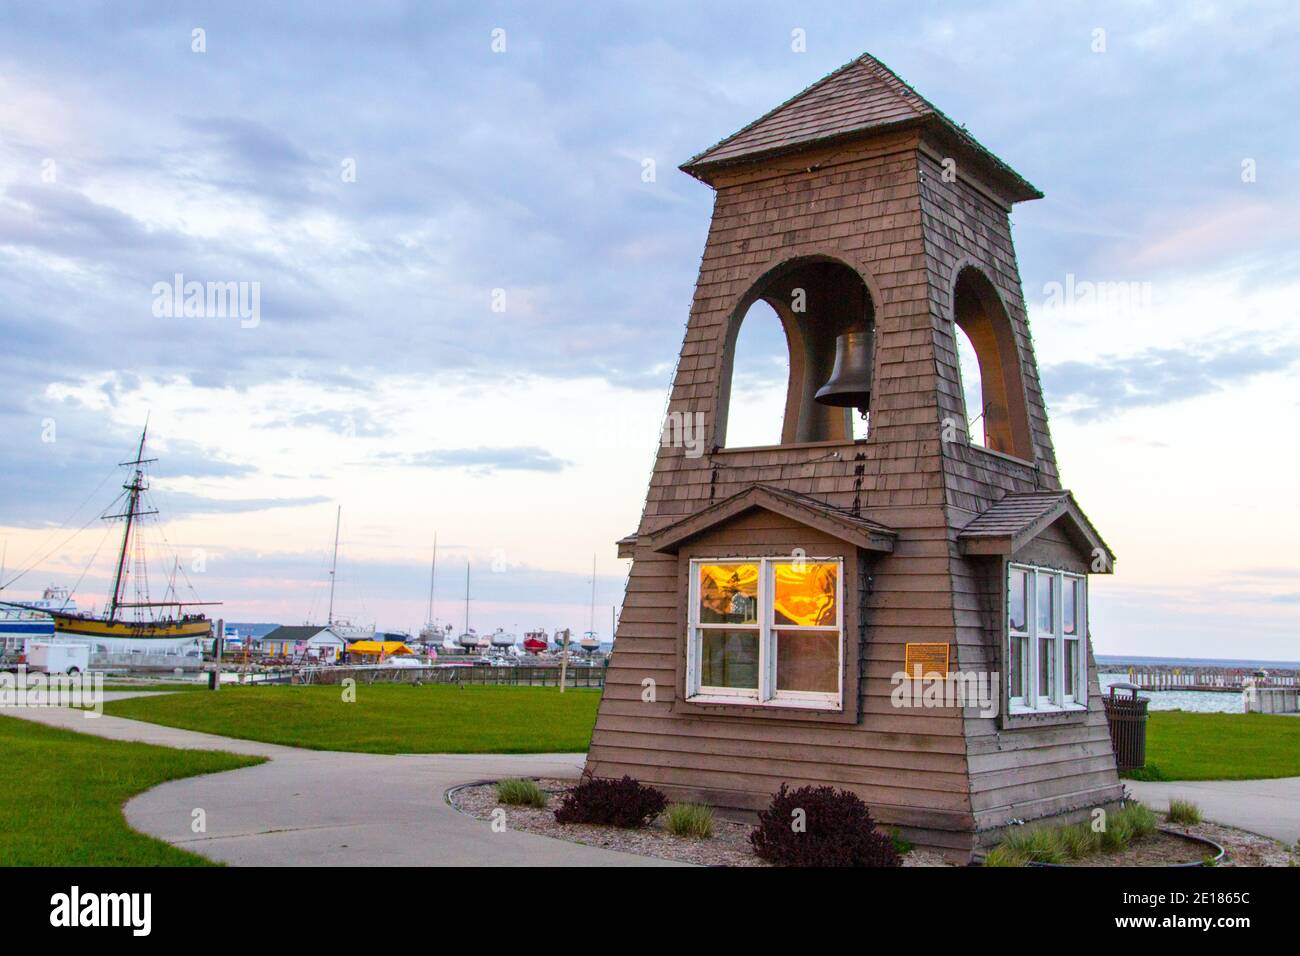 Mackinaw City, Michigan, USA - May 29, 2020: Sunset along the downtown waterfront district in the popular tourist town of Mackinaw City Stock Photo